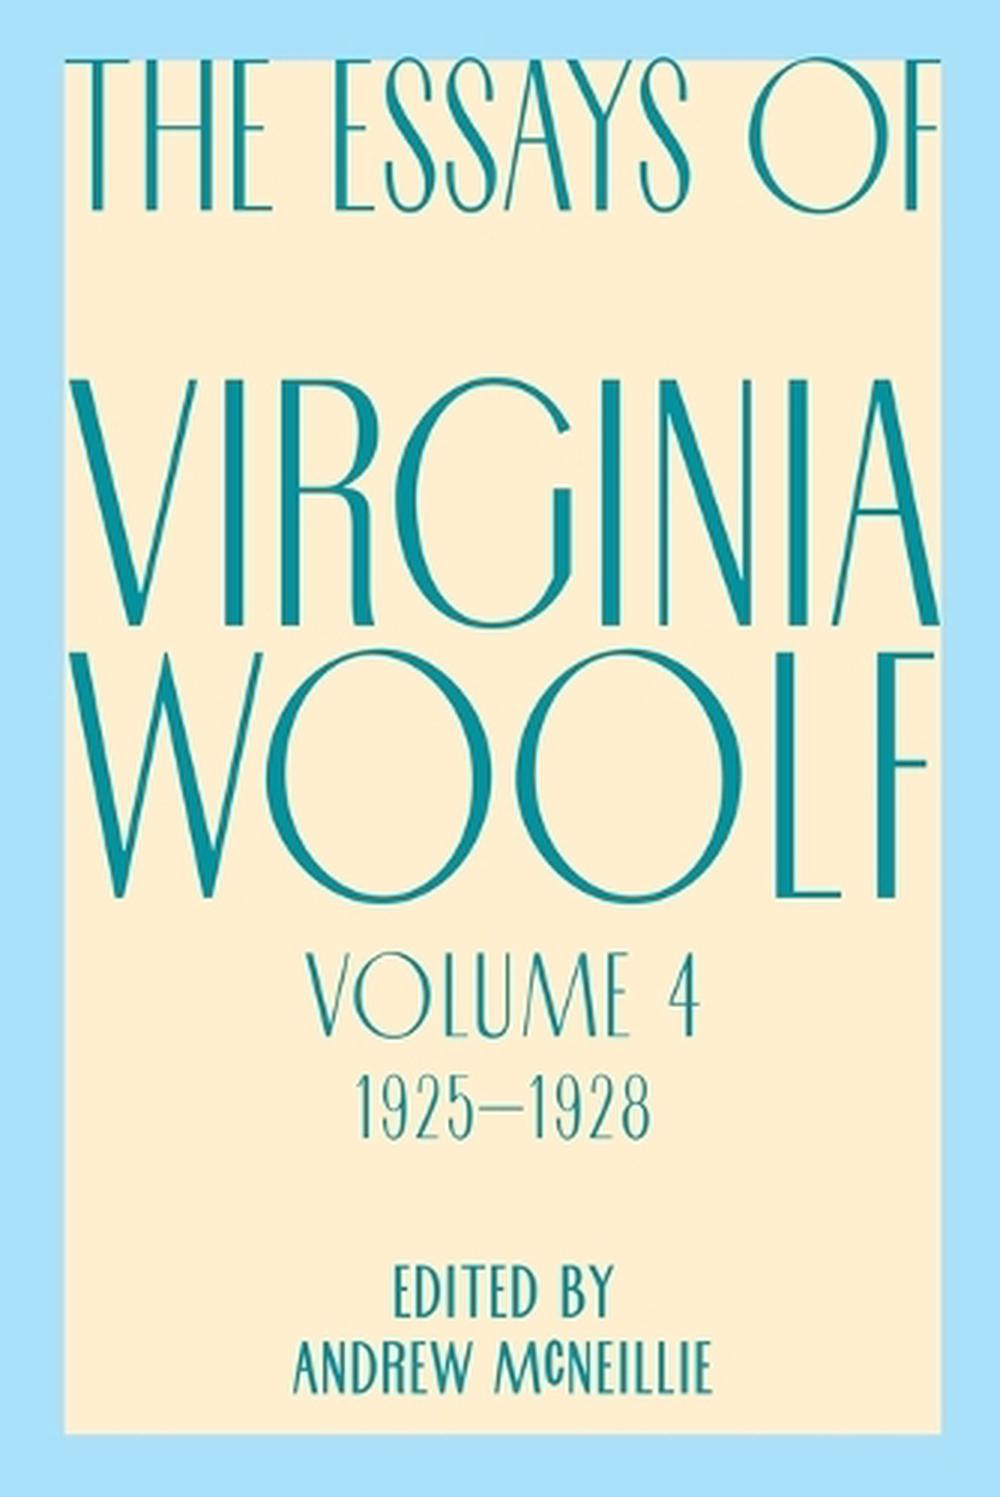 virginia woolf a collection of critical essays